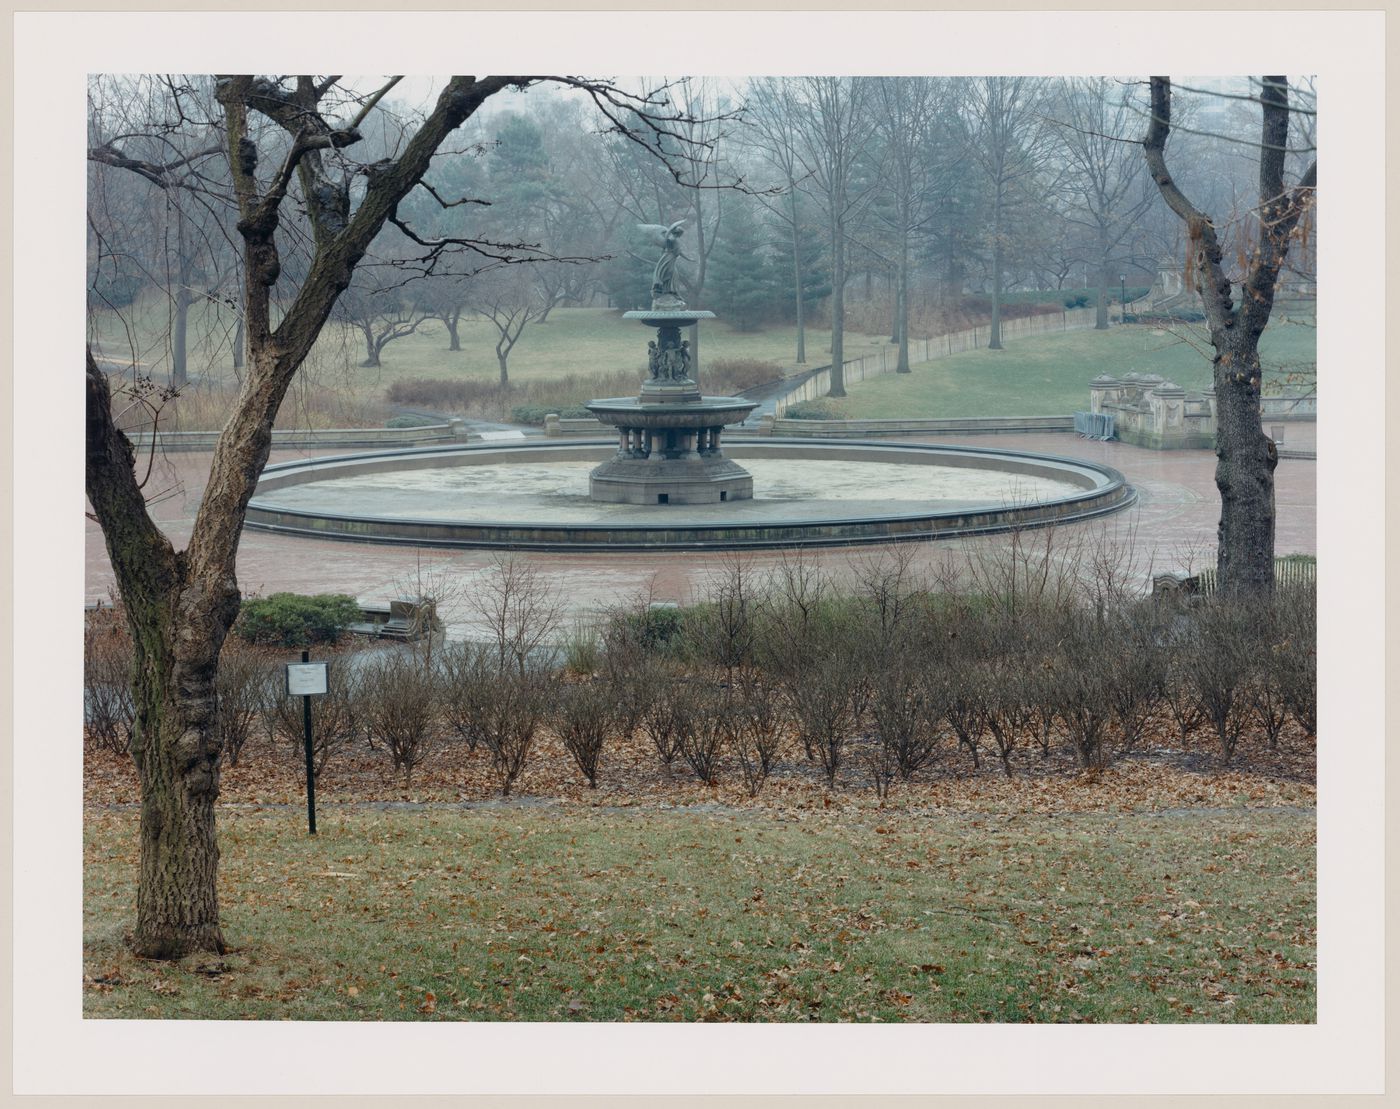 Viewing Olmsted: View of The Bethesda Fountain, Central park, New York City, New York